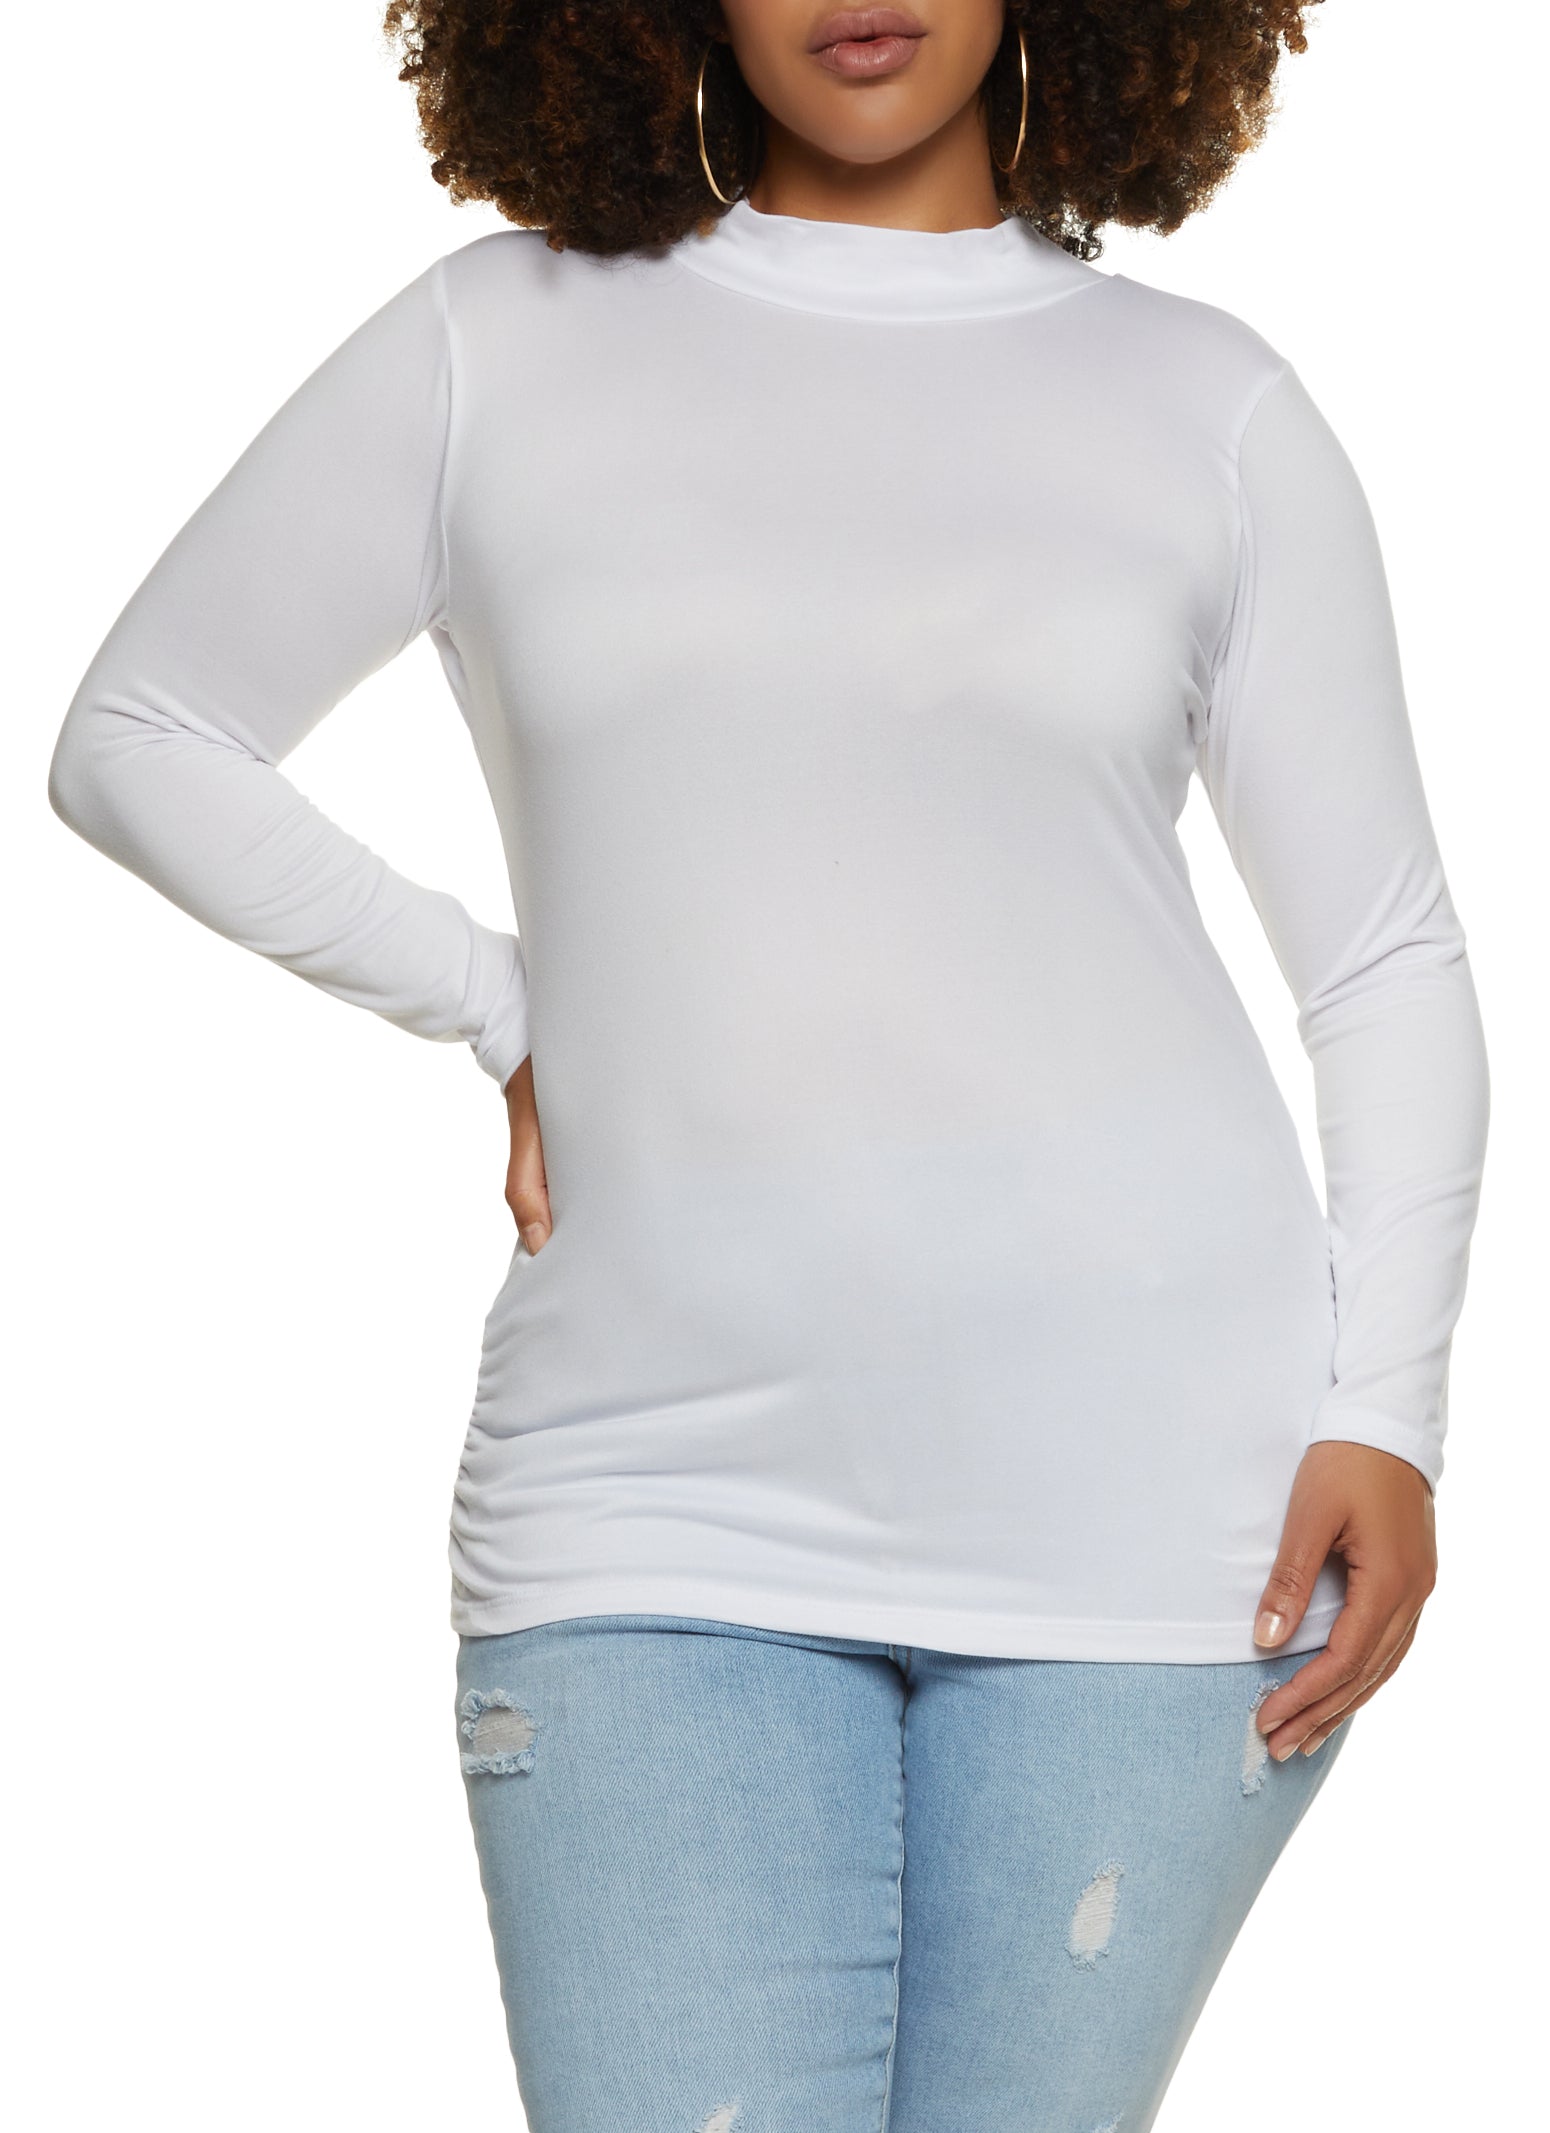 Womens Plus Size Basic Mock Neck Ruched Side Top, White, Size 1X